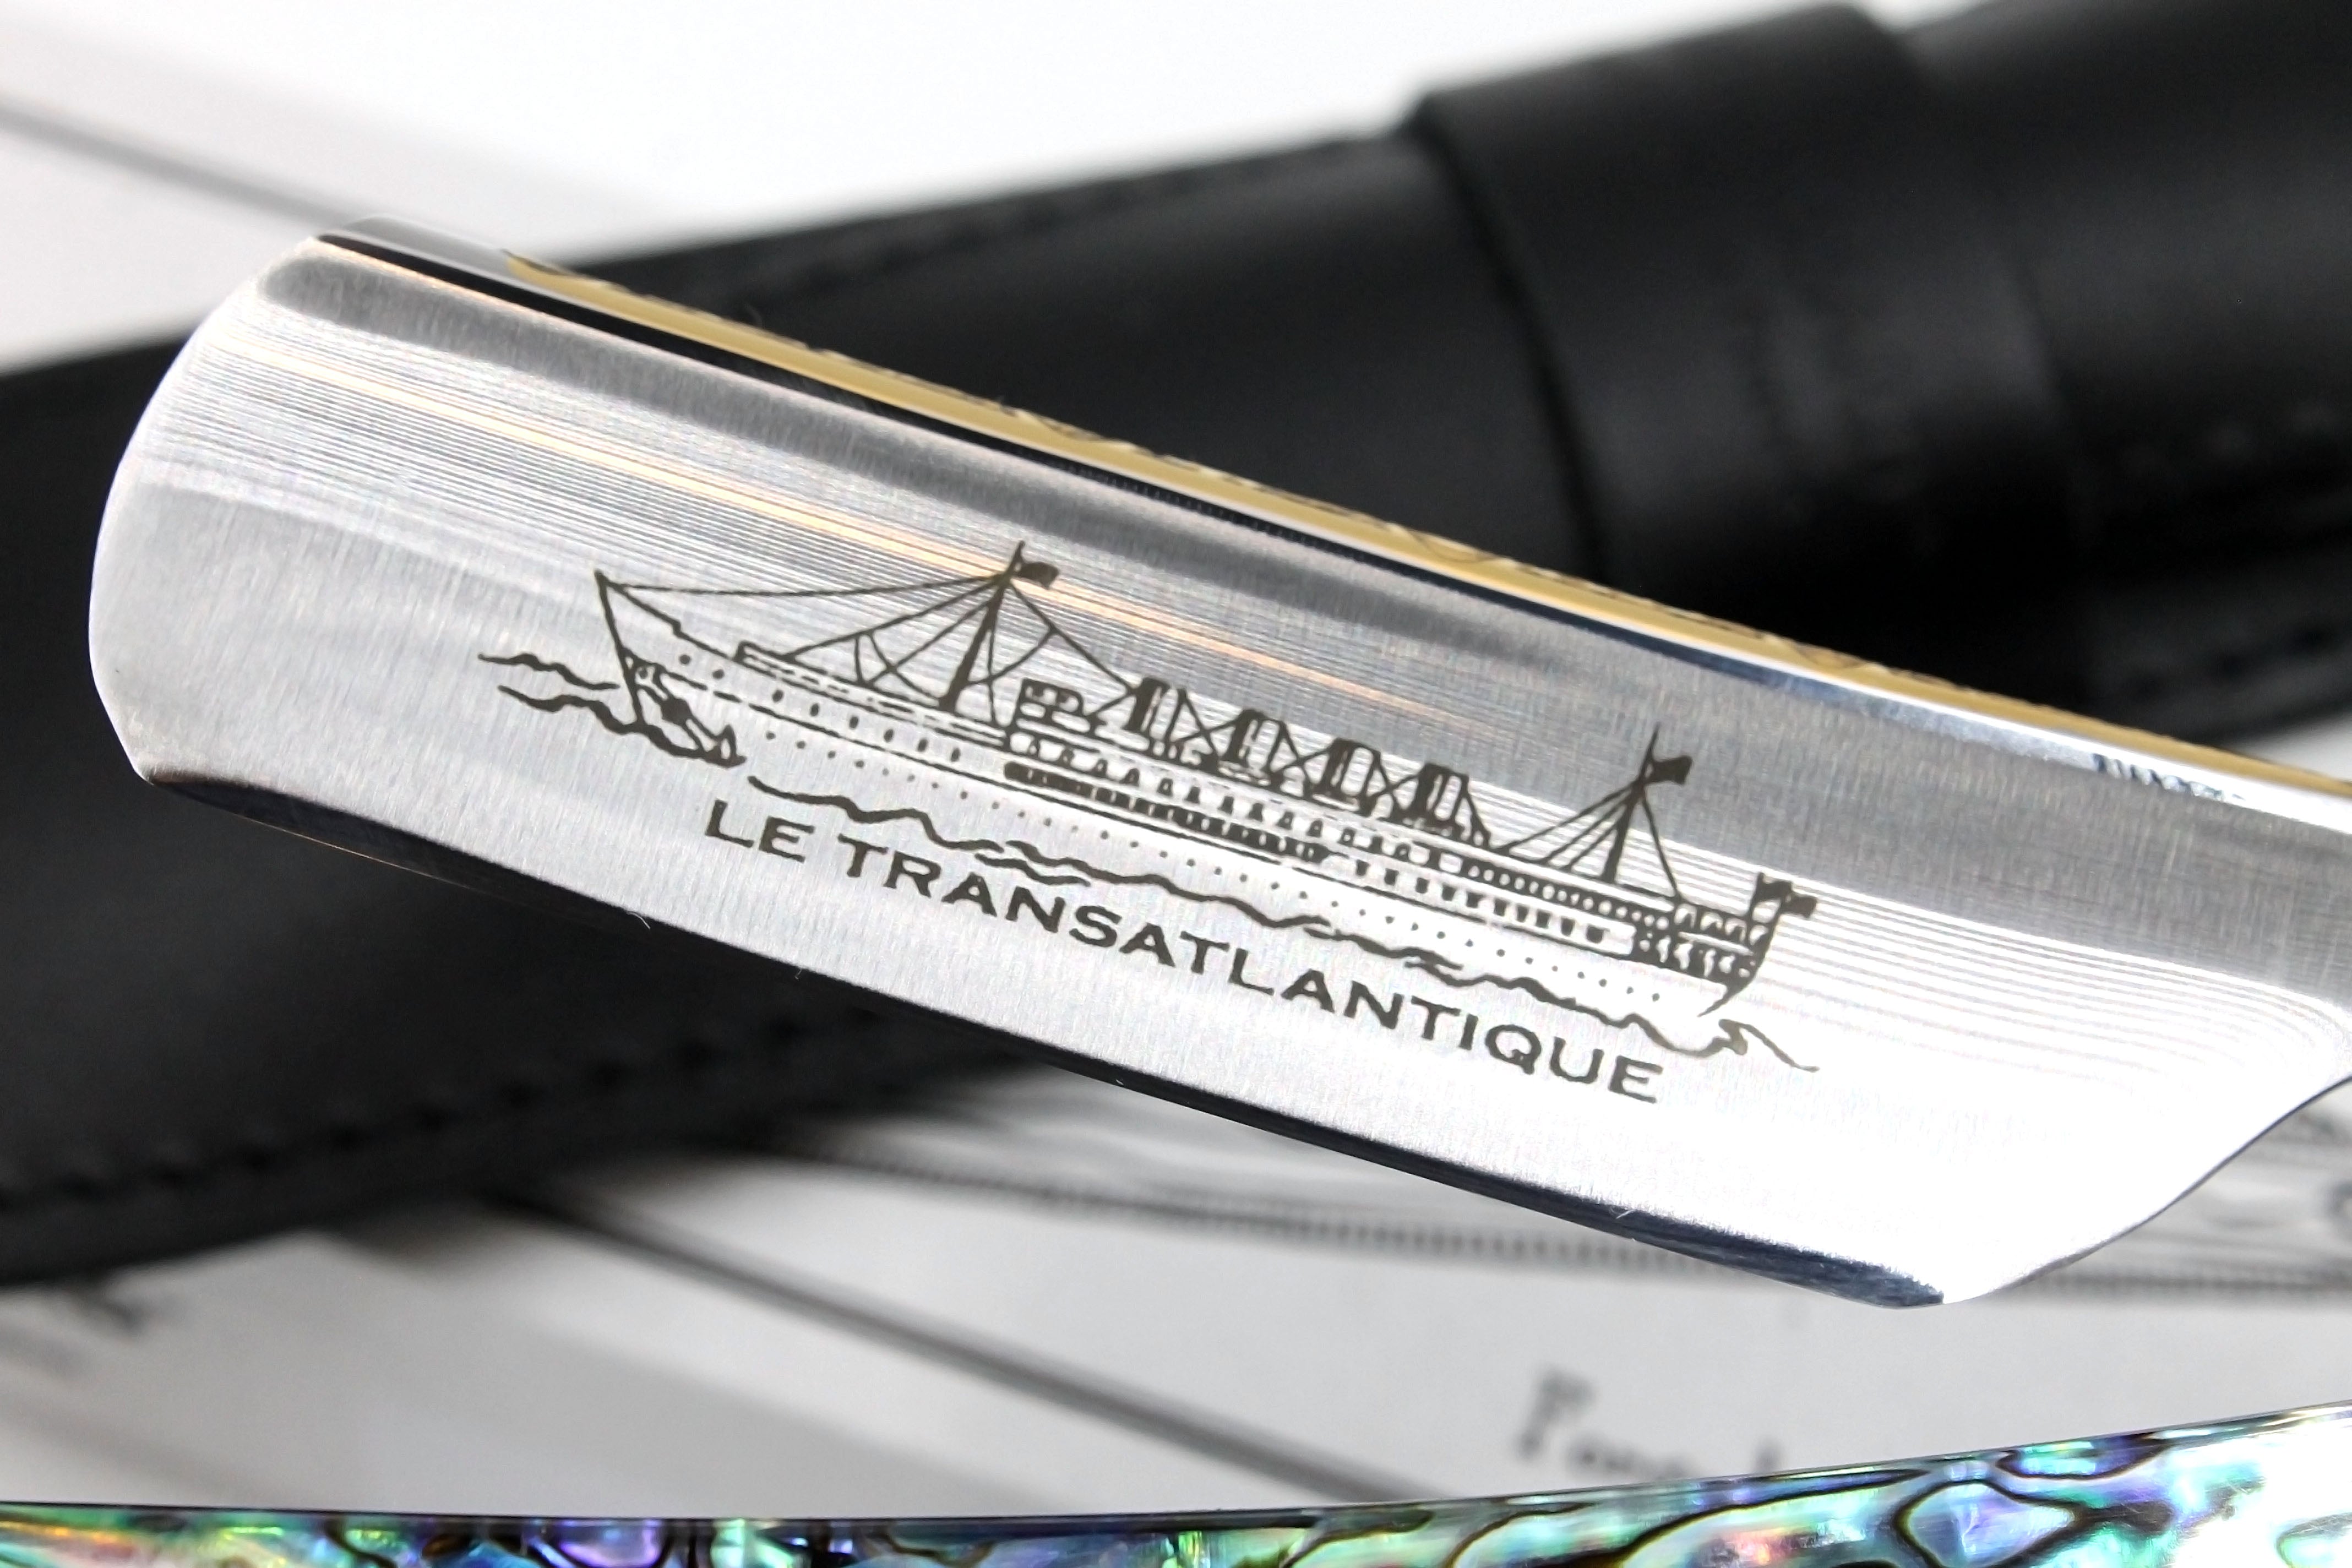 Thiers Issard 7/8 "Le Transatlantique" Gold Etch - Engraved Gold Spine Abalone Scales - Full Hollow Straight Razor